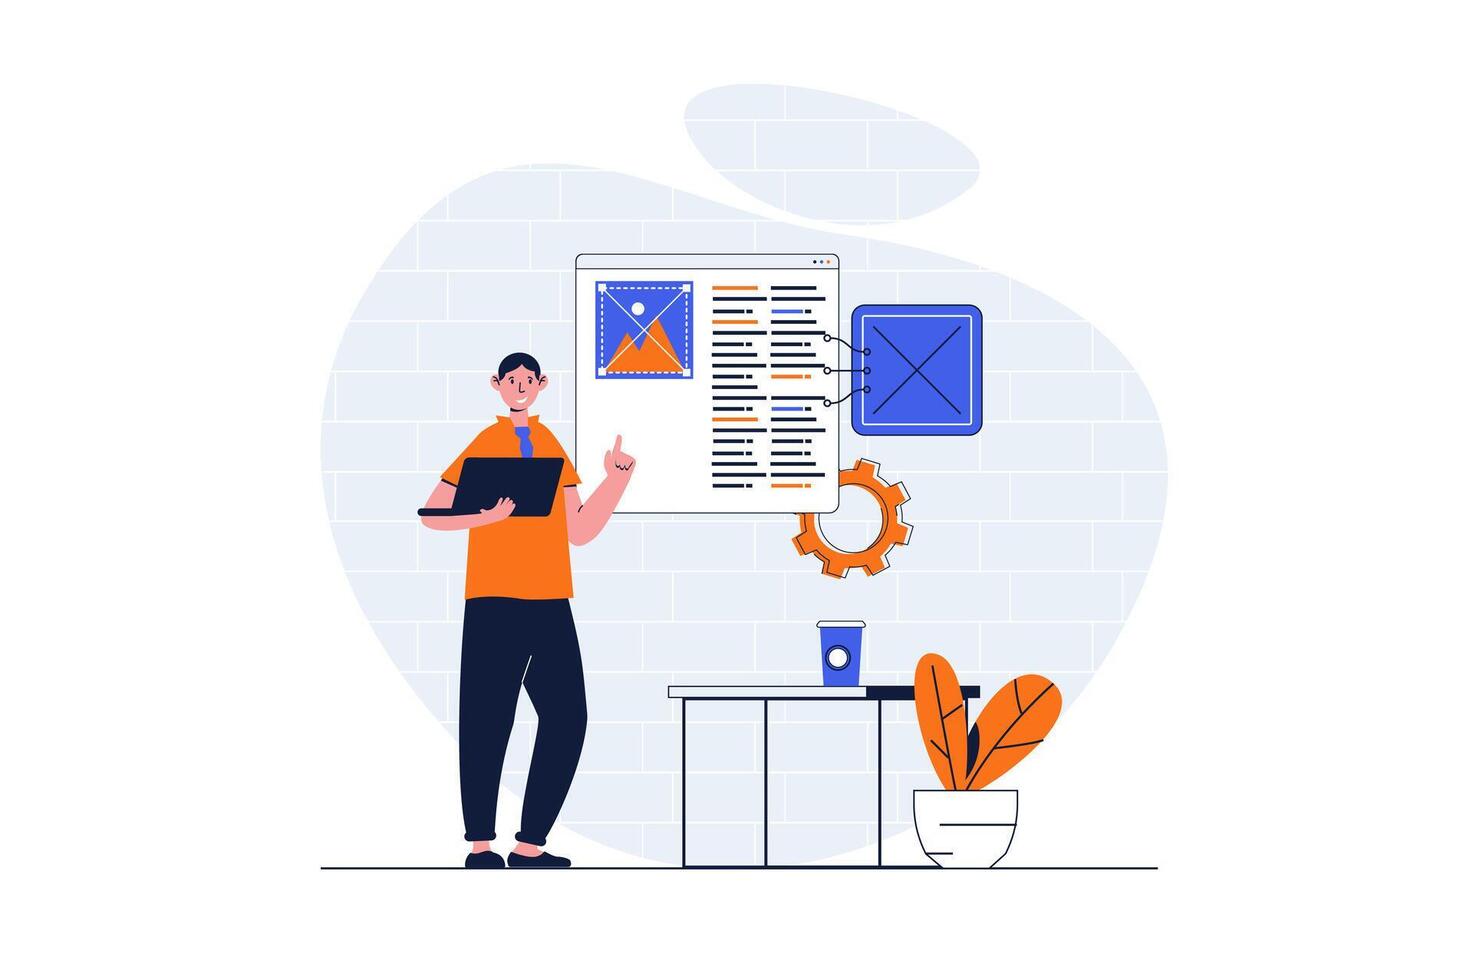 Programming web concept with character scene. Man making program and creating webpage layout at platform. People situation in flat design. Vector illustration for social media marketing material.